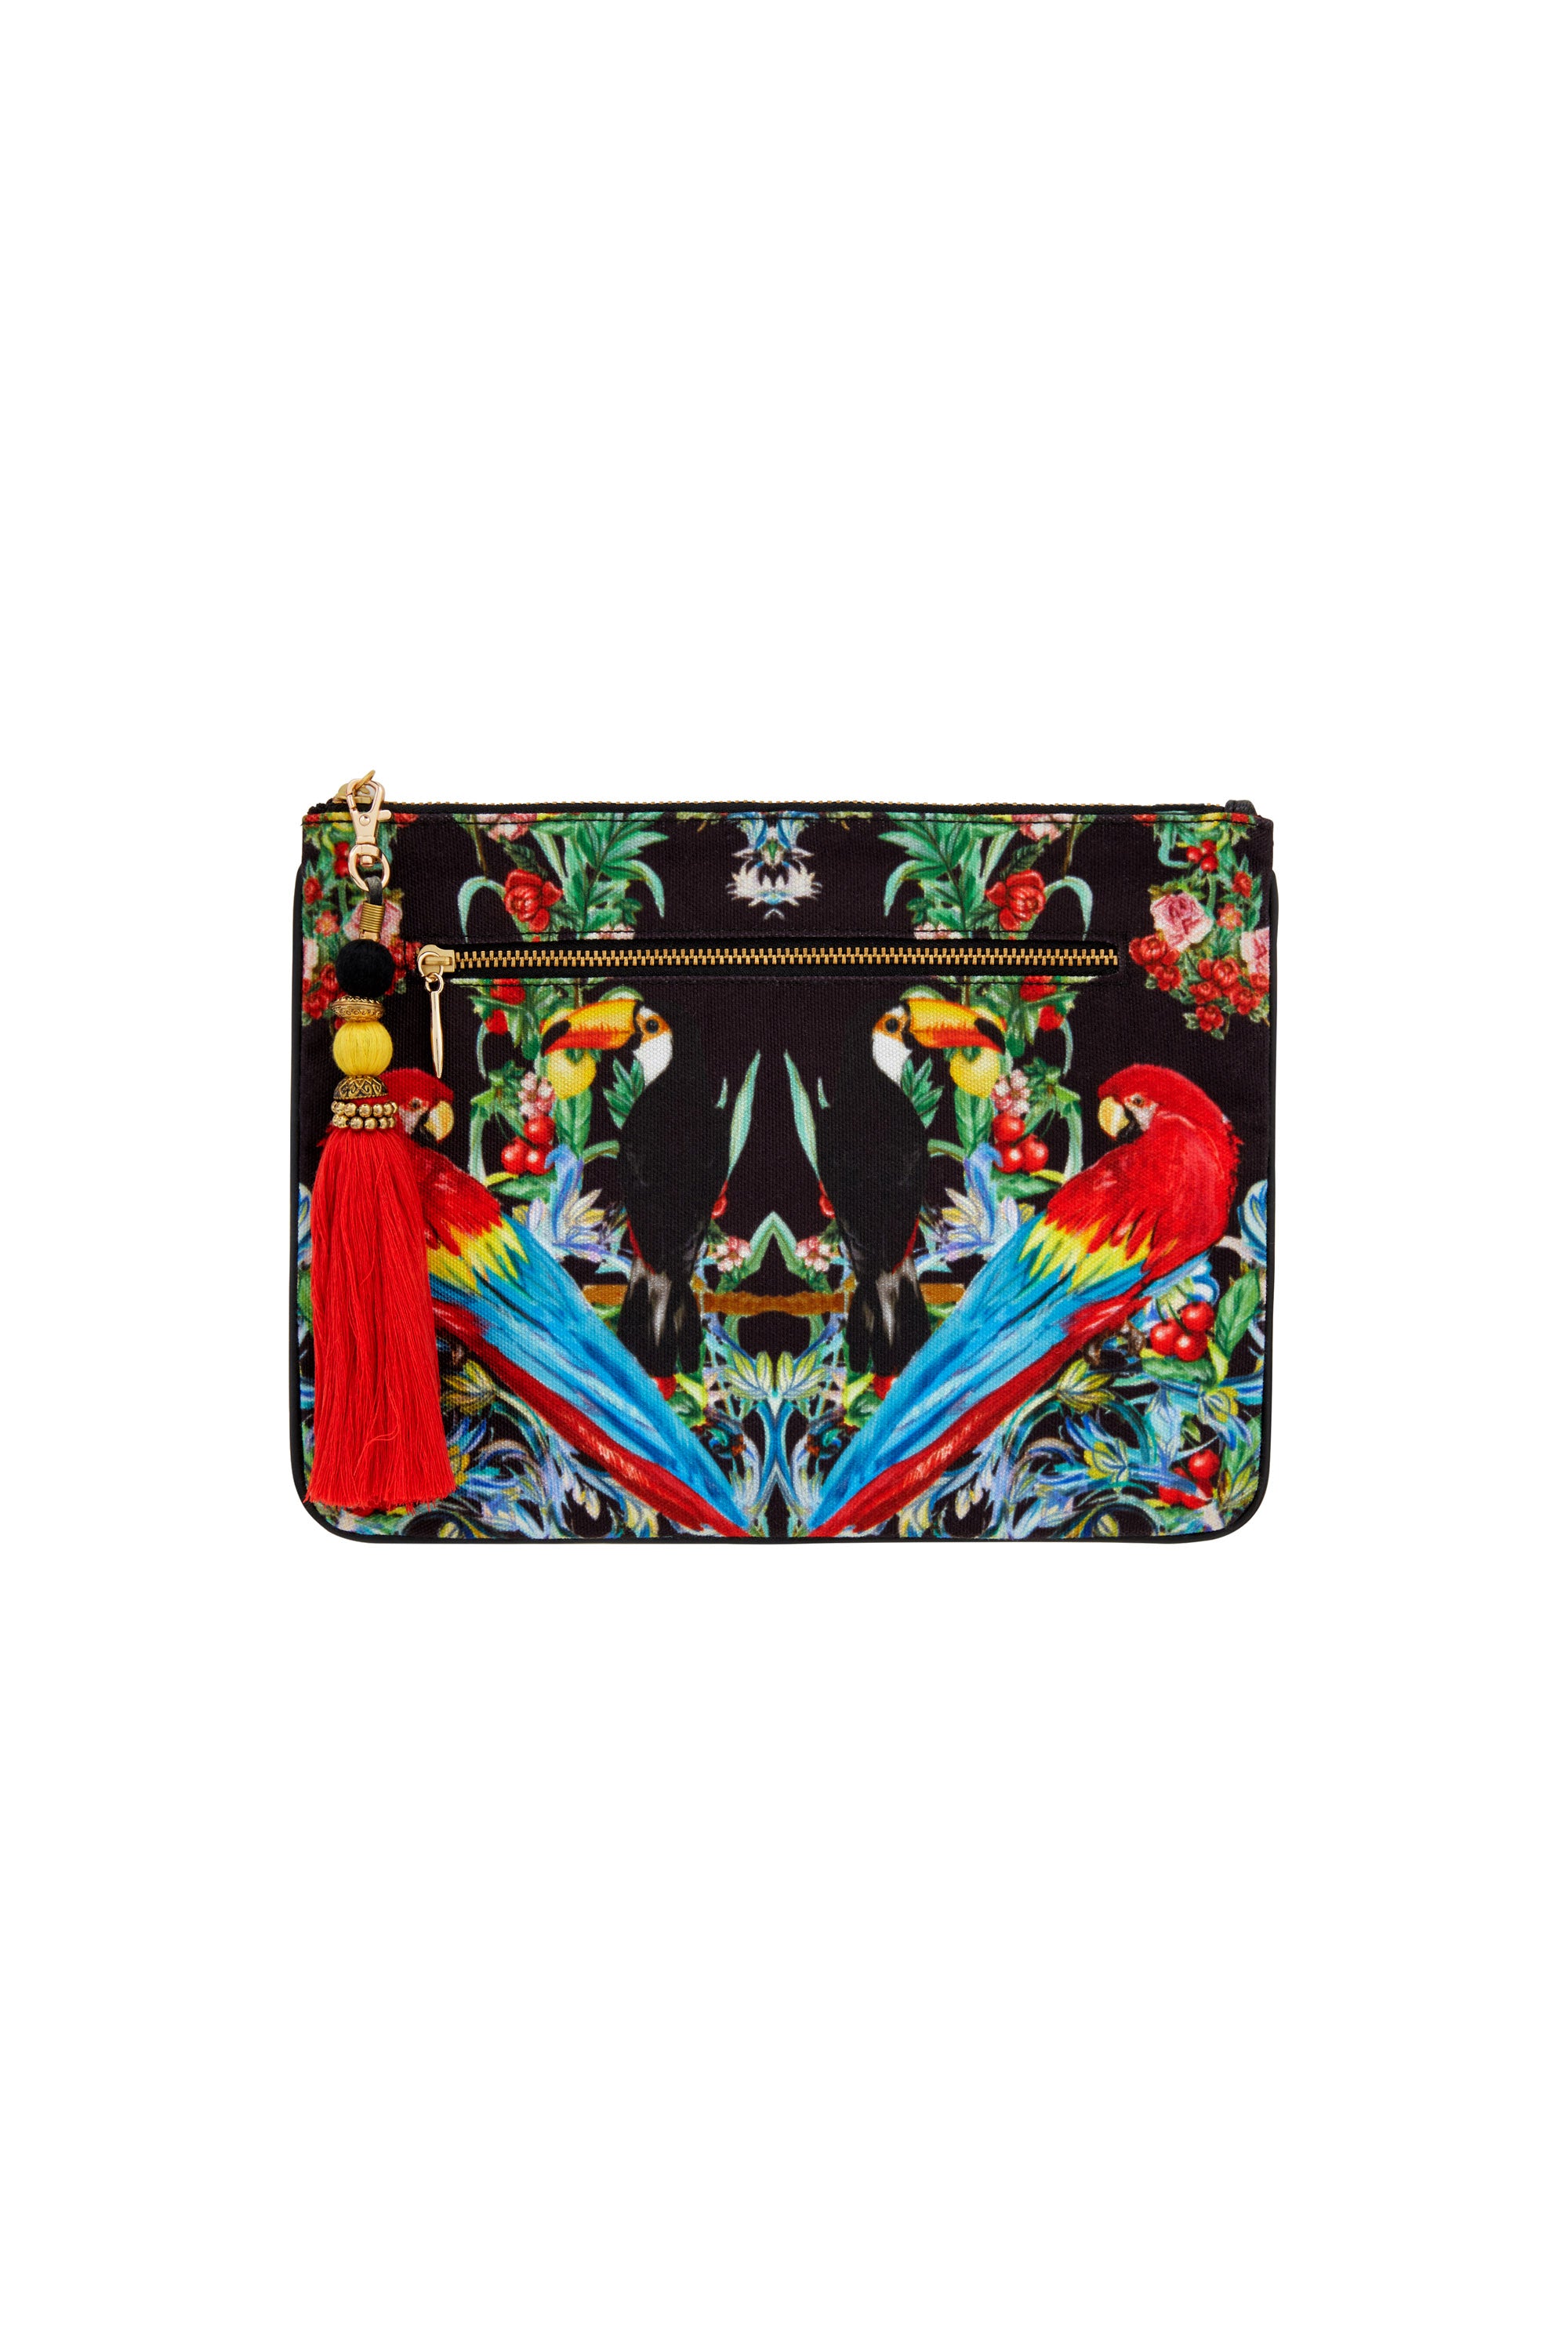 TOUCAN PLAY SMALL CANVAS CLUTCH